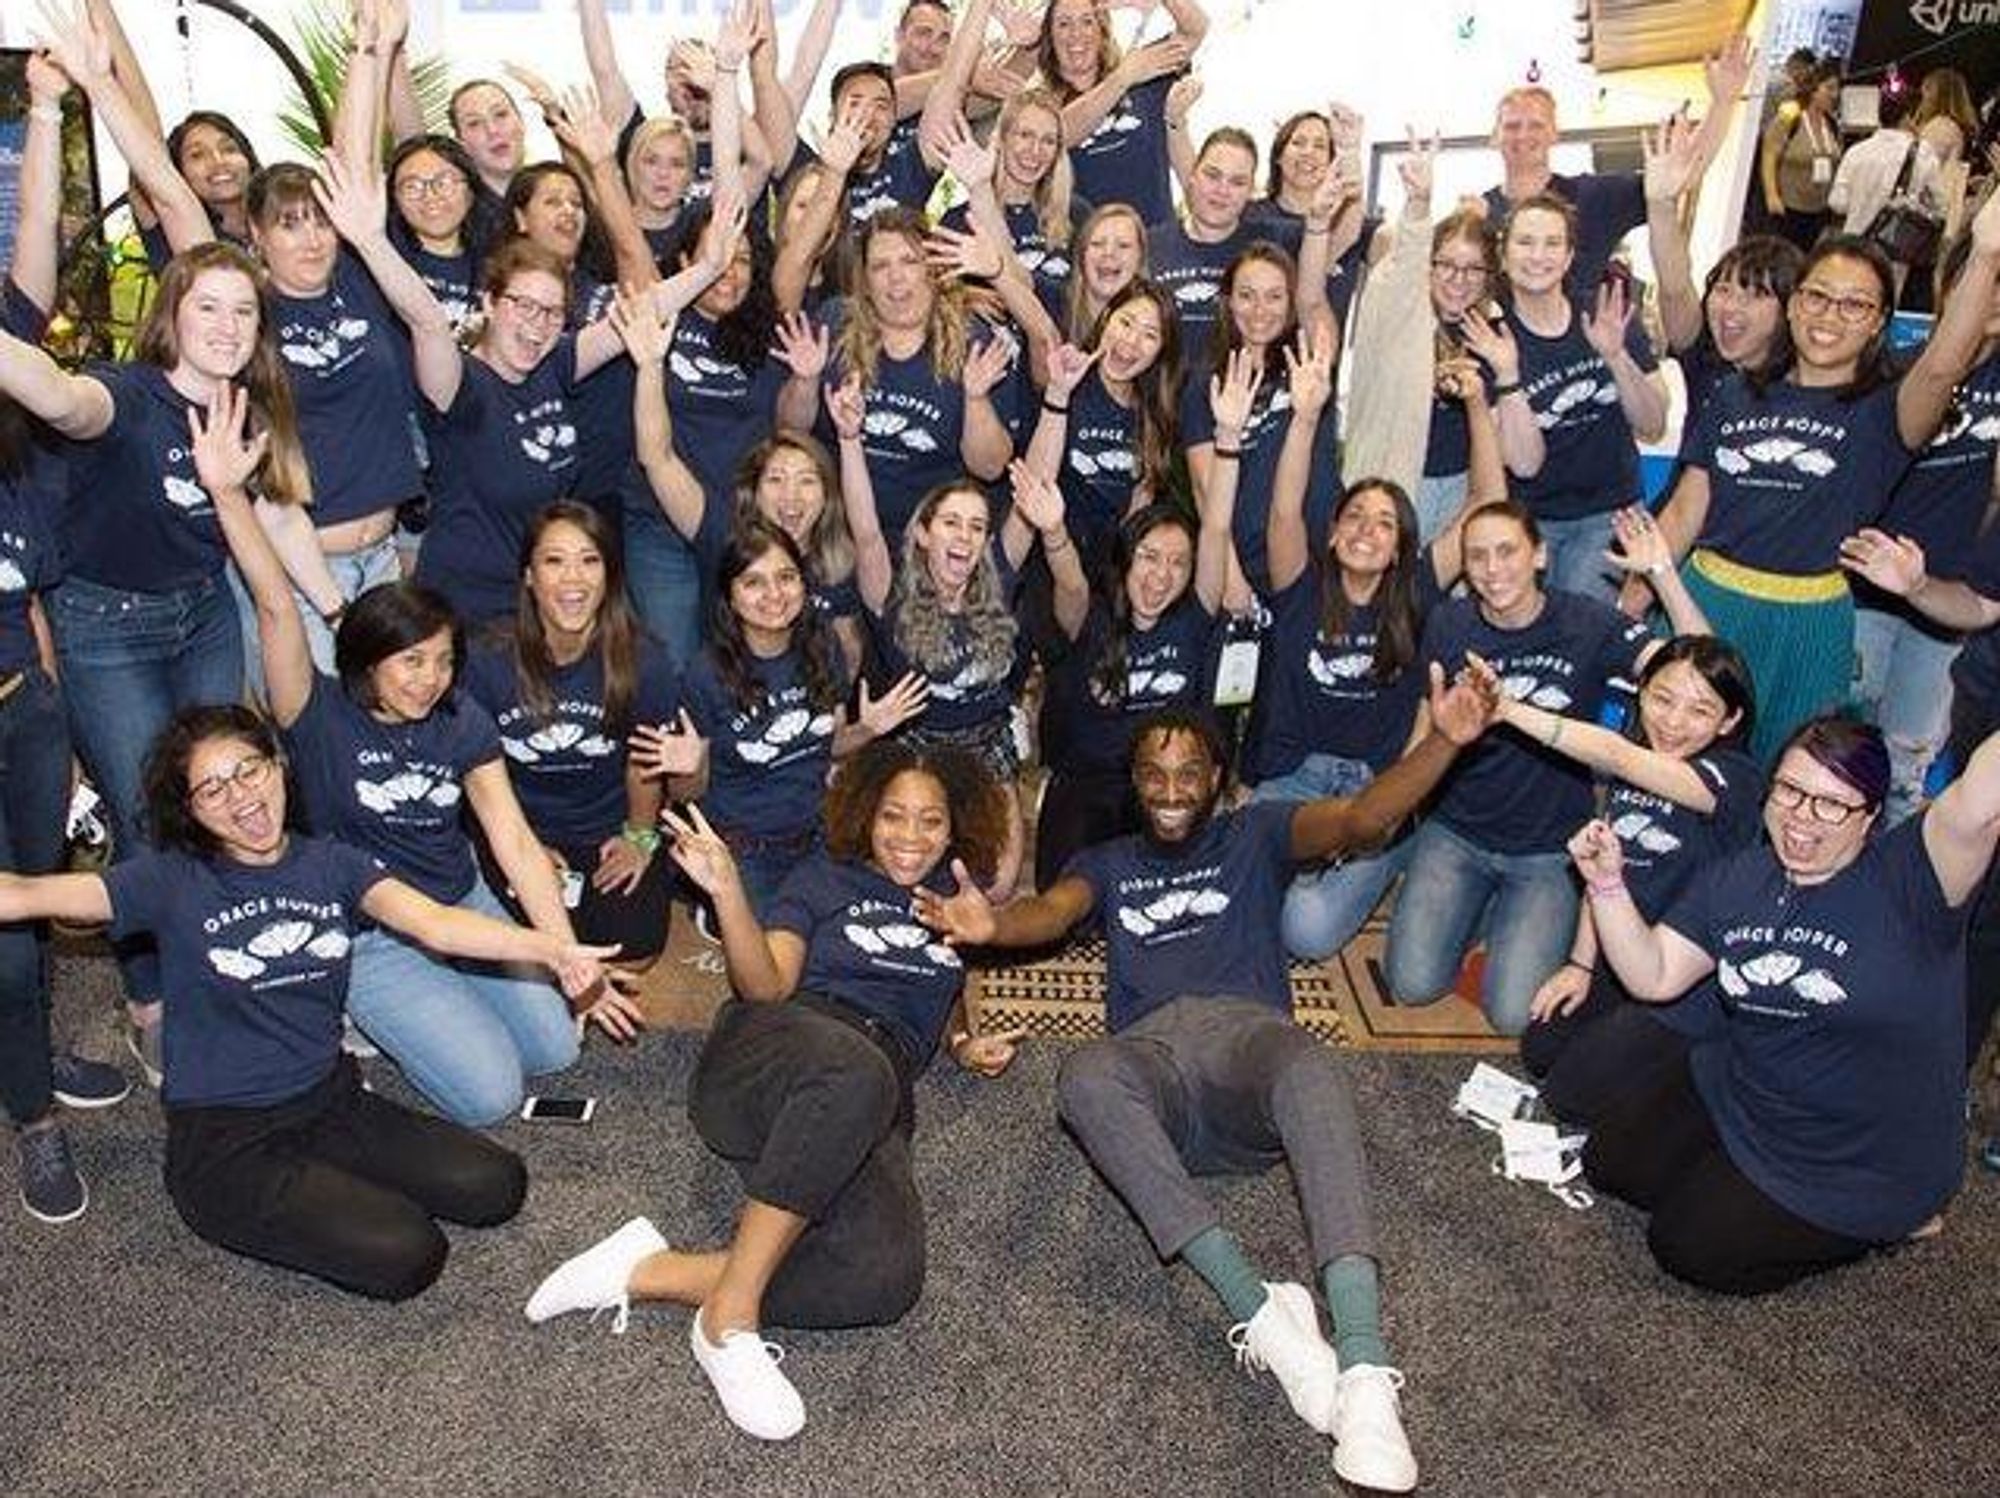 Zillow employees take a team photo.